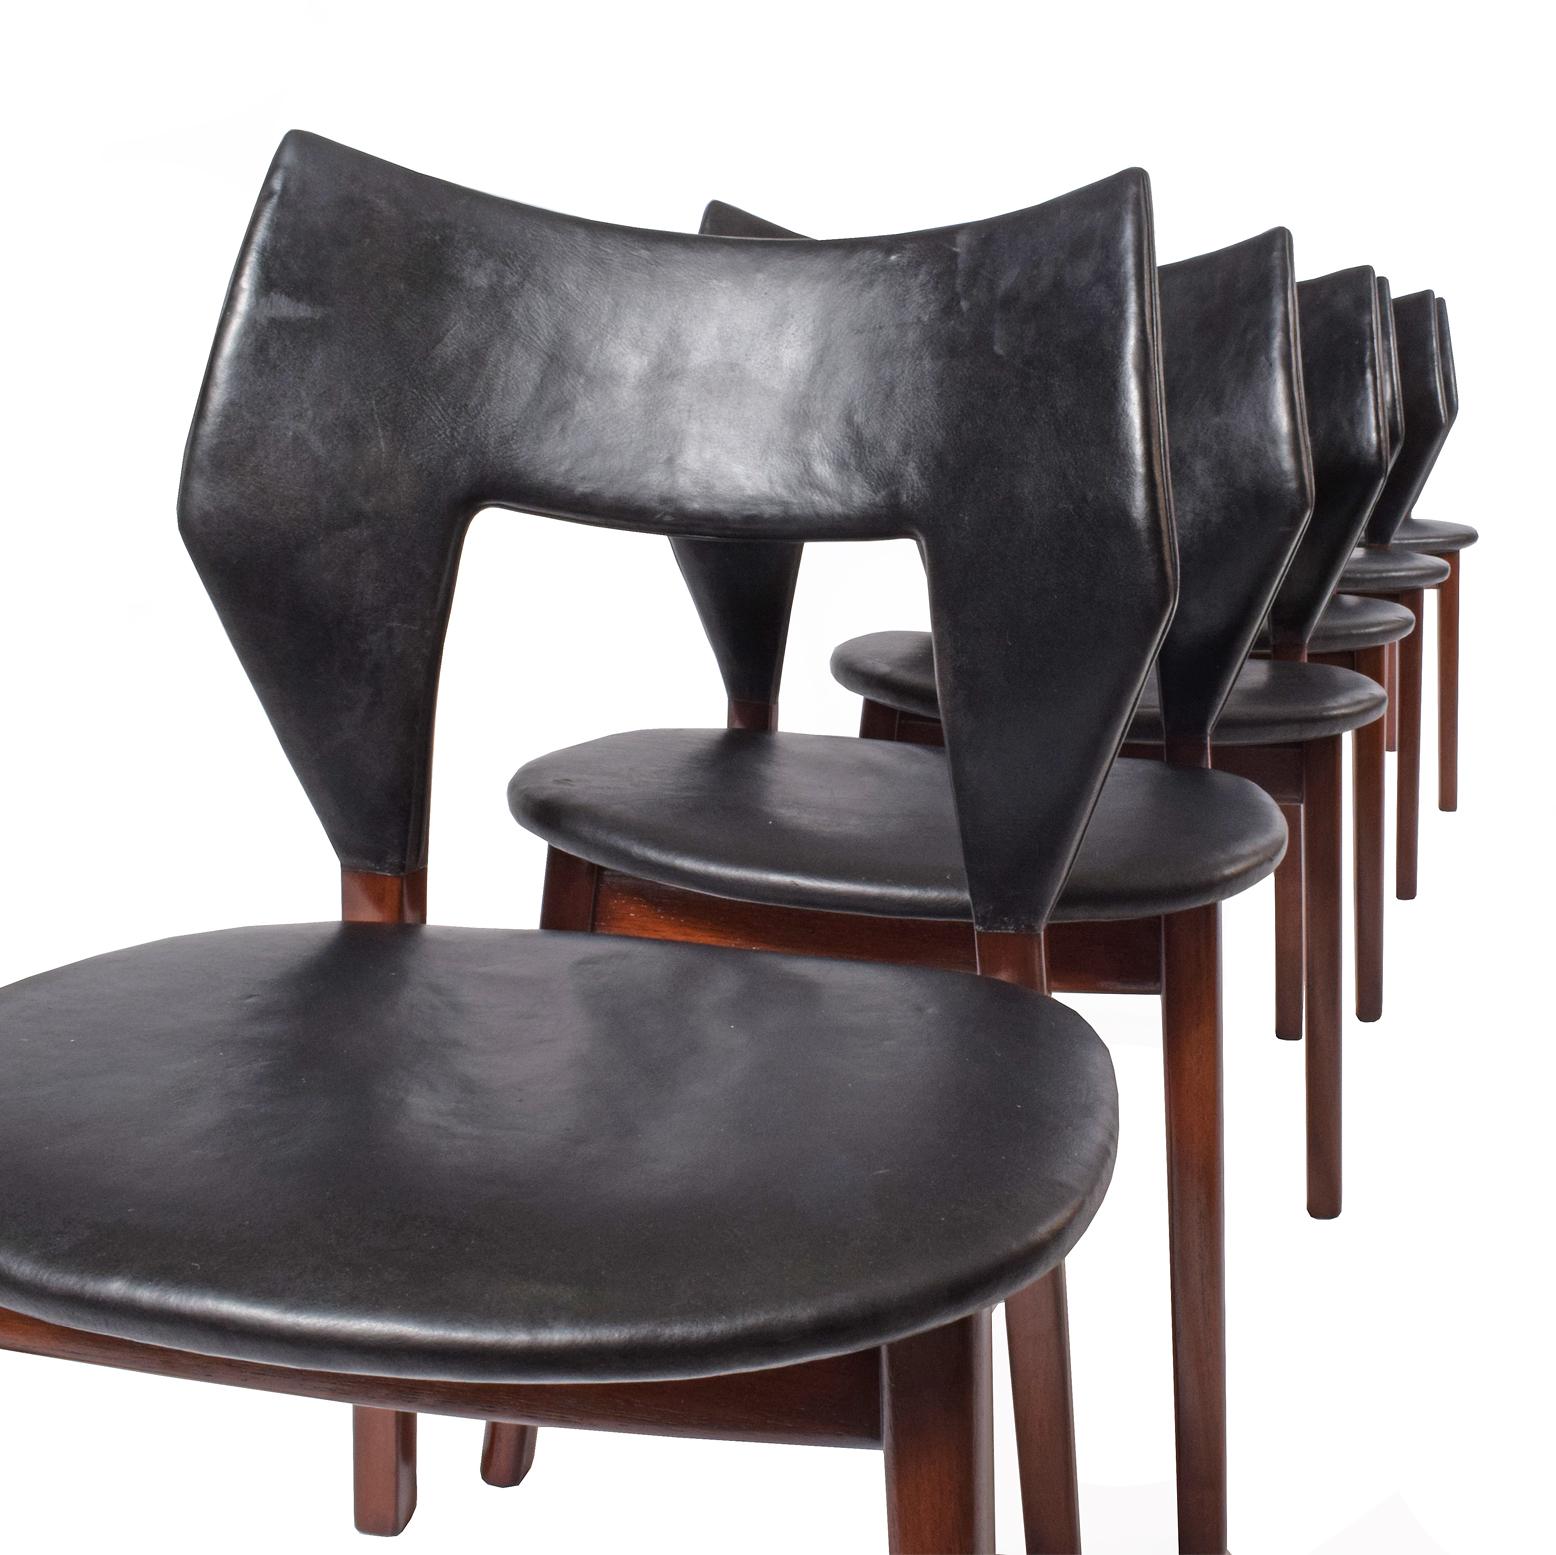 Scandinavian Modern Tove & Edvard Kind-Larsen Rare Six Dining Chairs for Thorald Madsen, 1960 For Sale